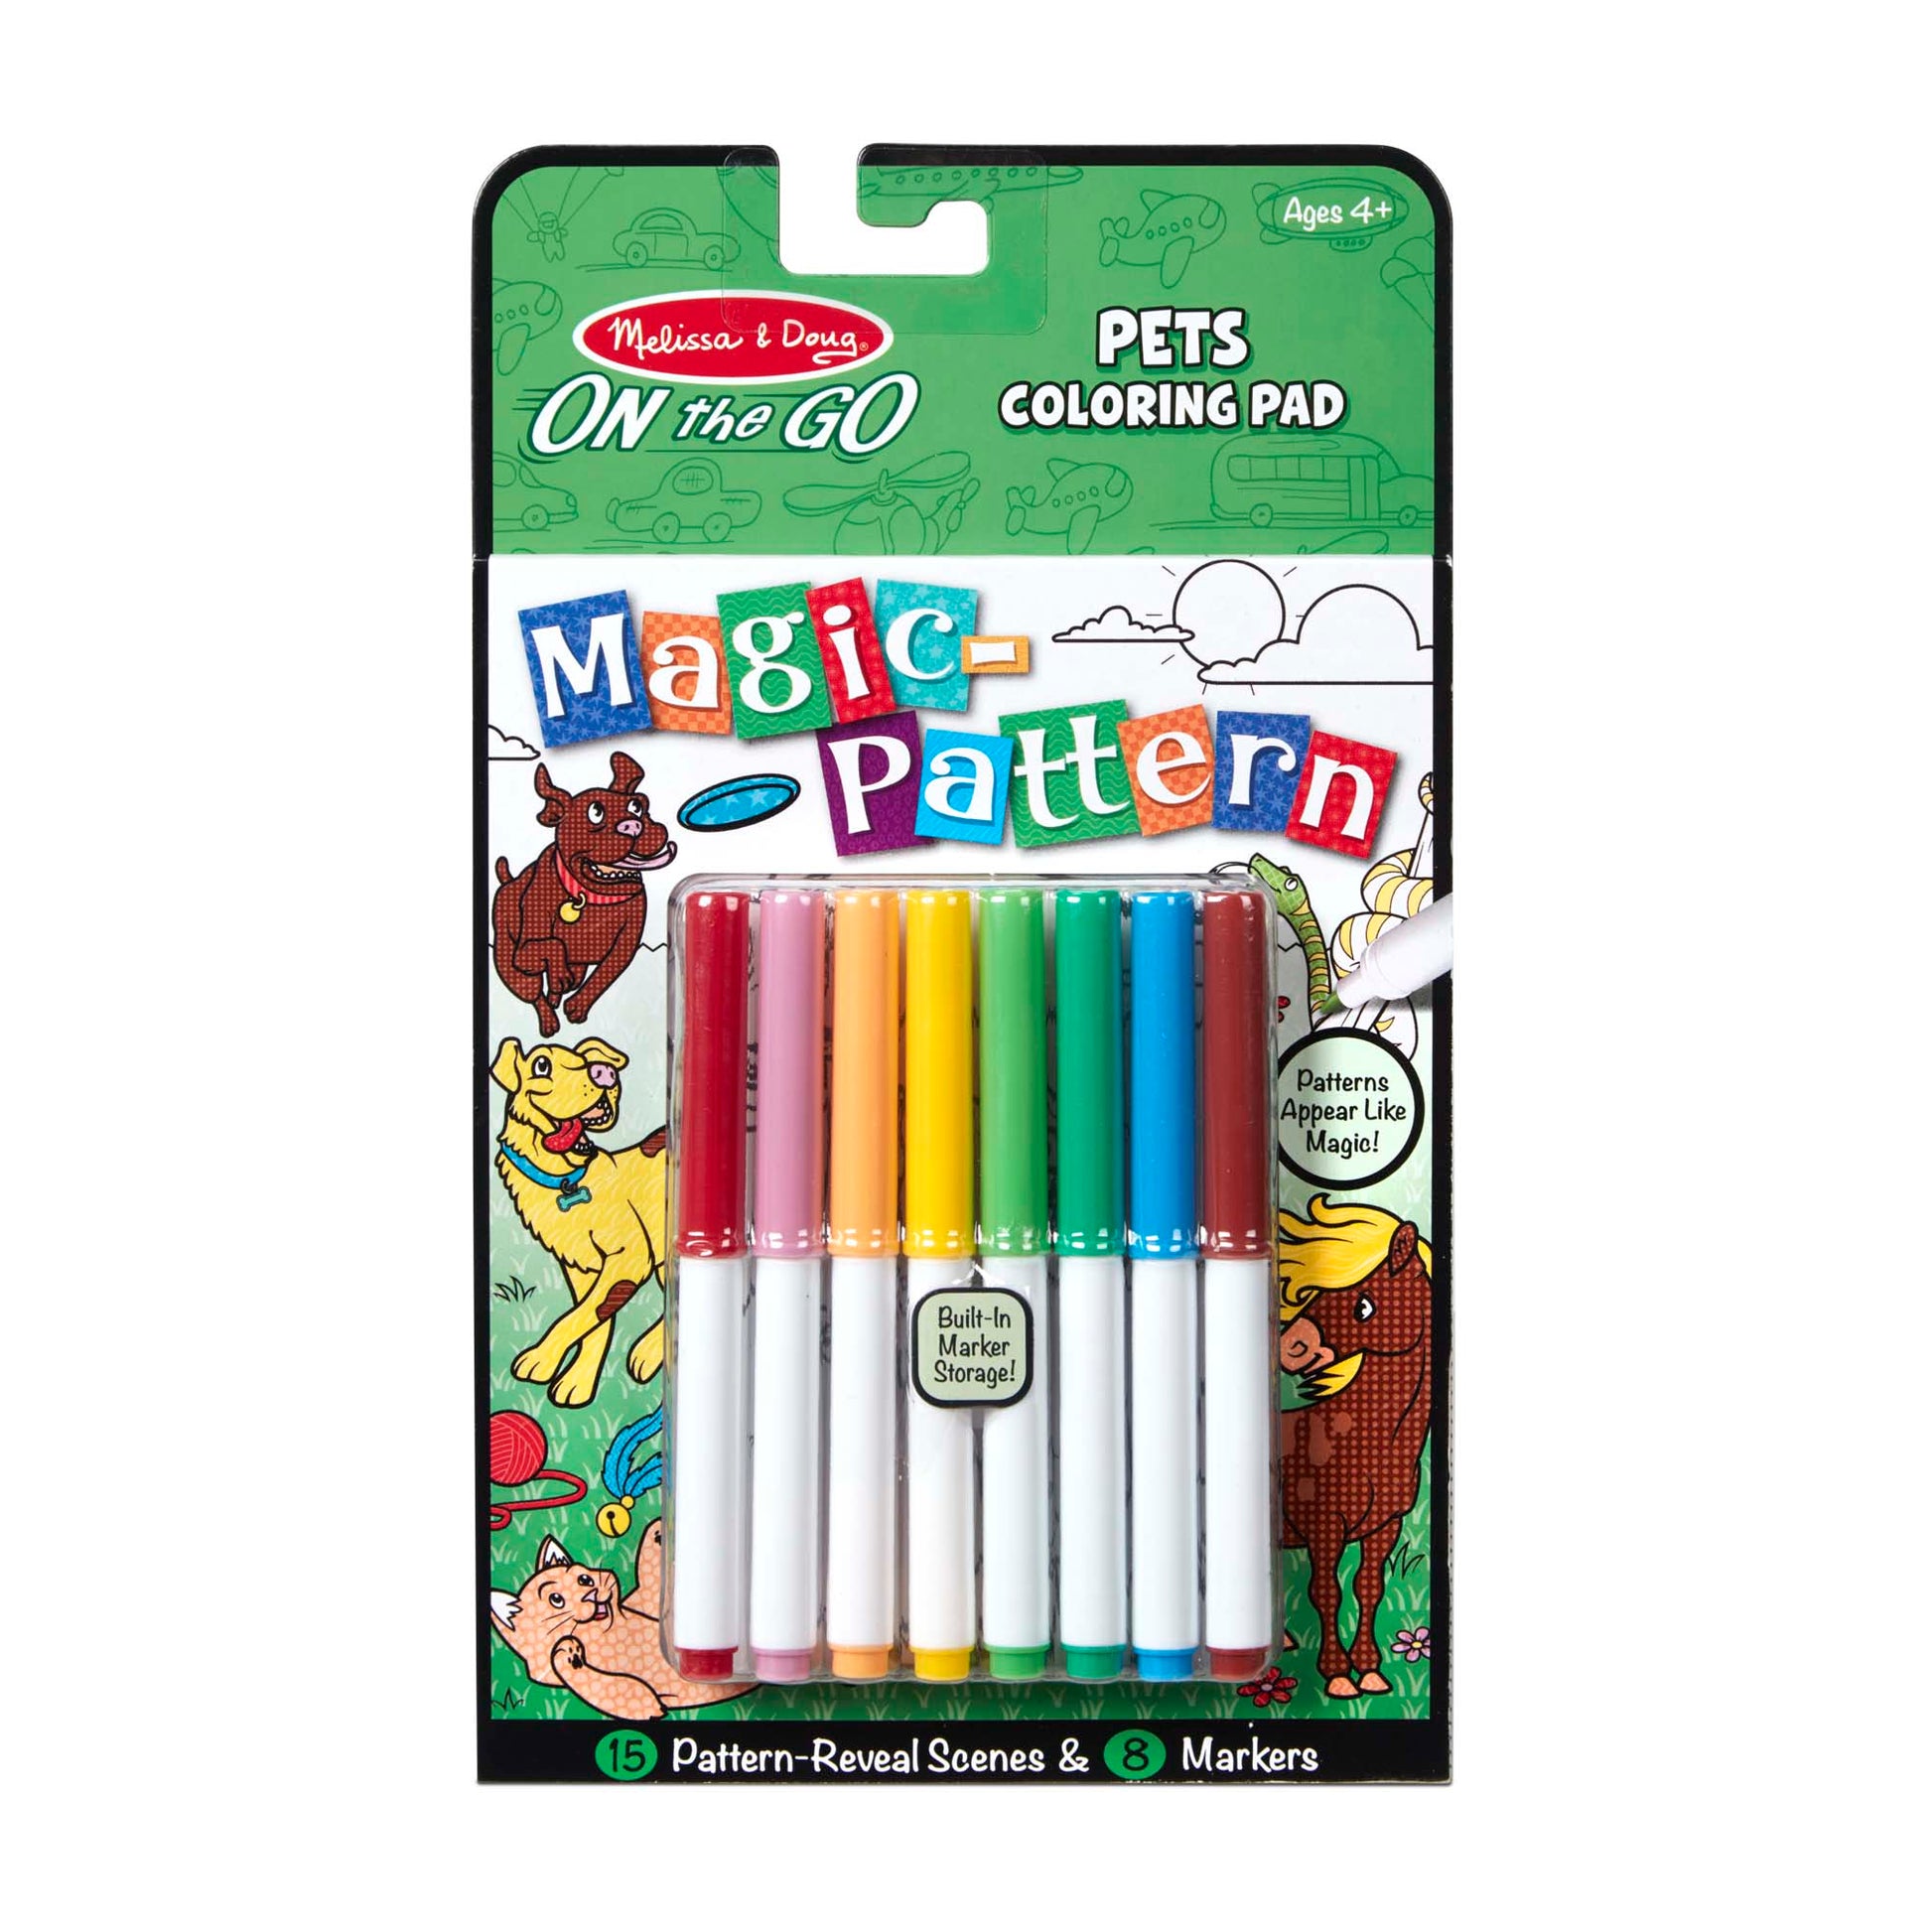 On the Go Magic Pattern Pad Pets